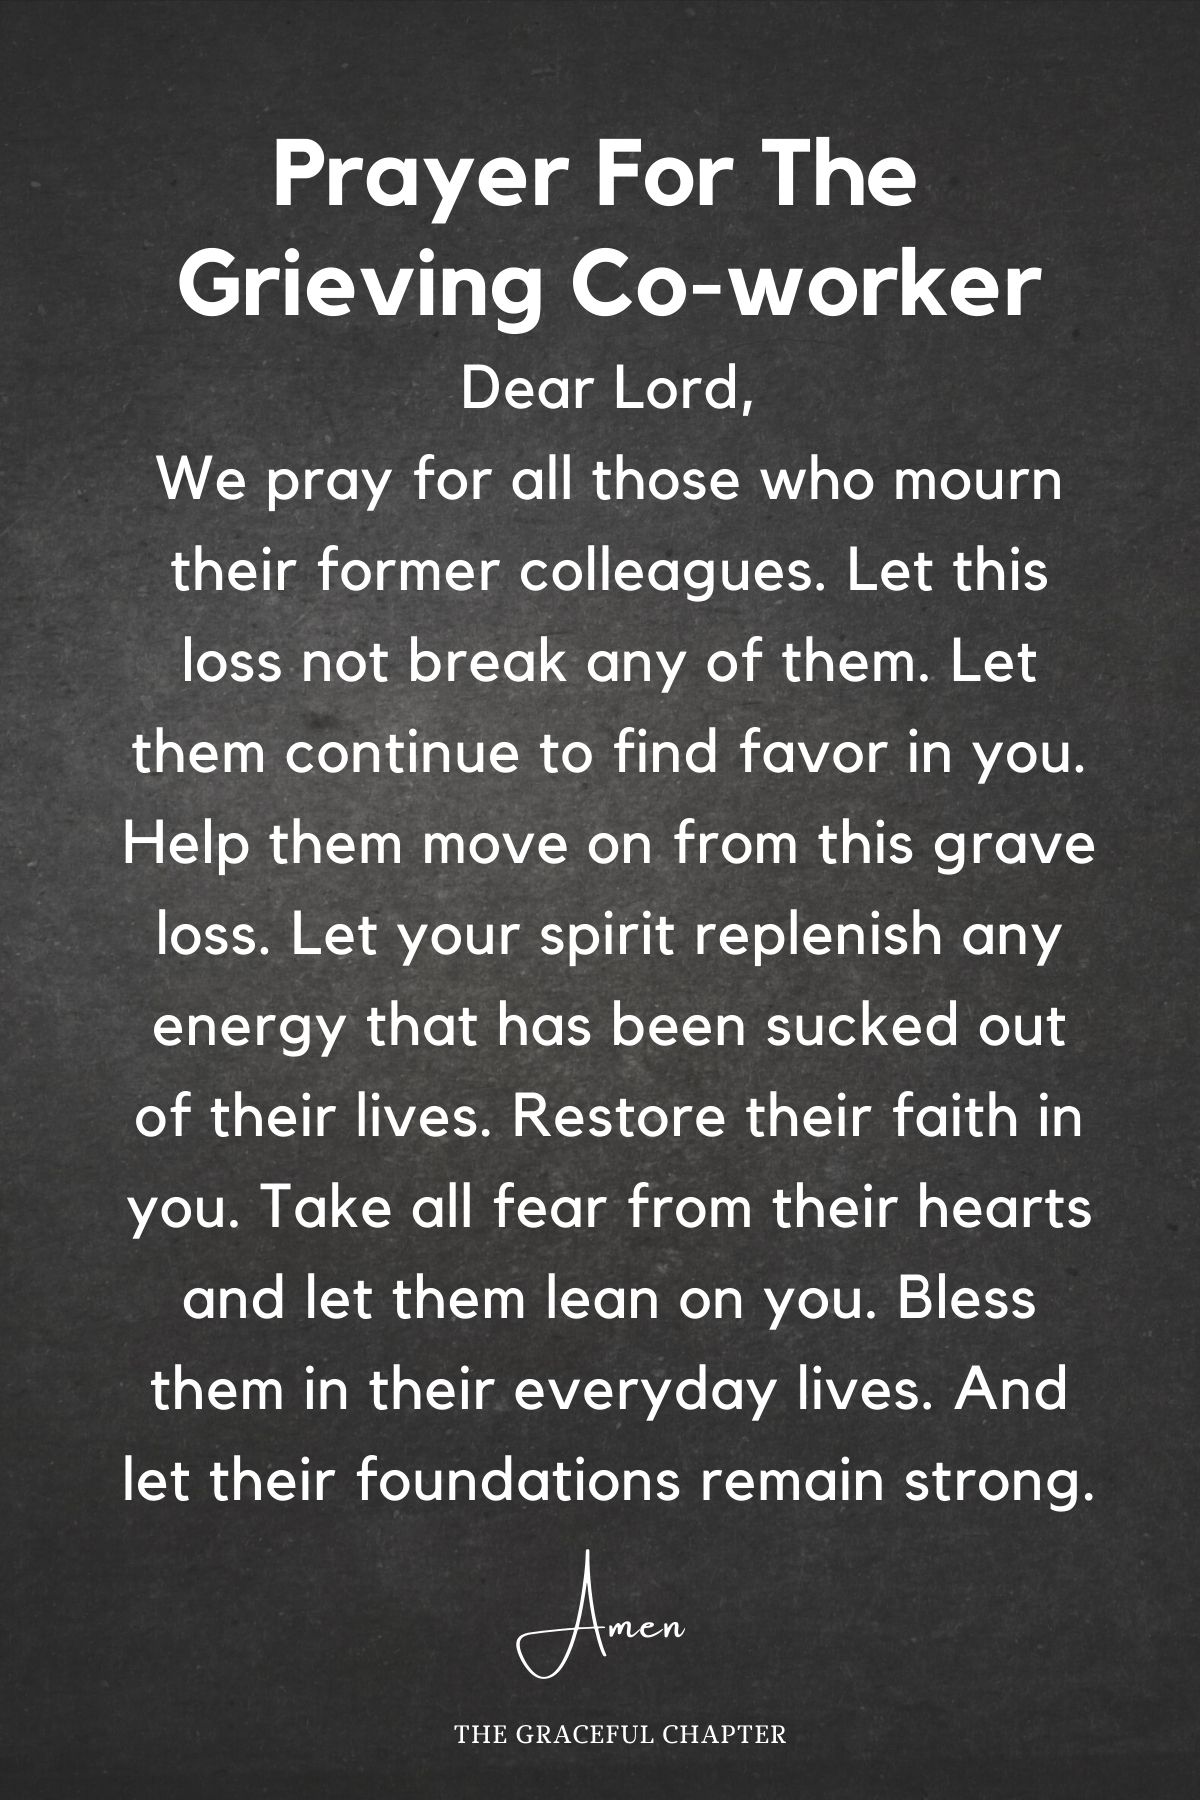 Prayer for the grieving co-worker